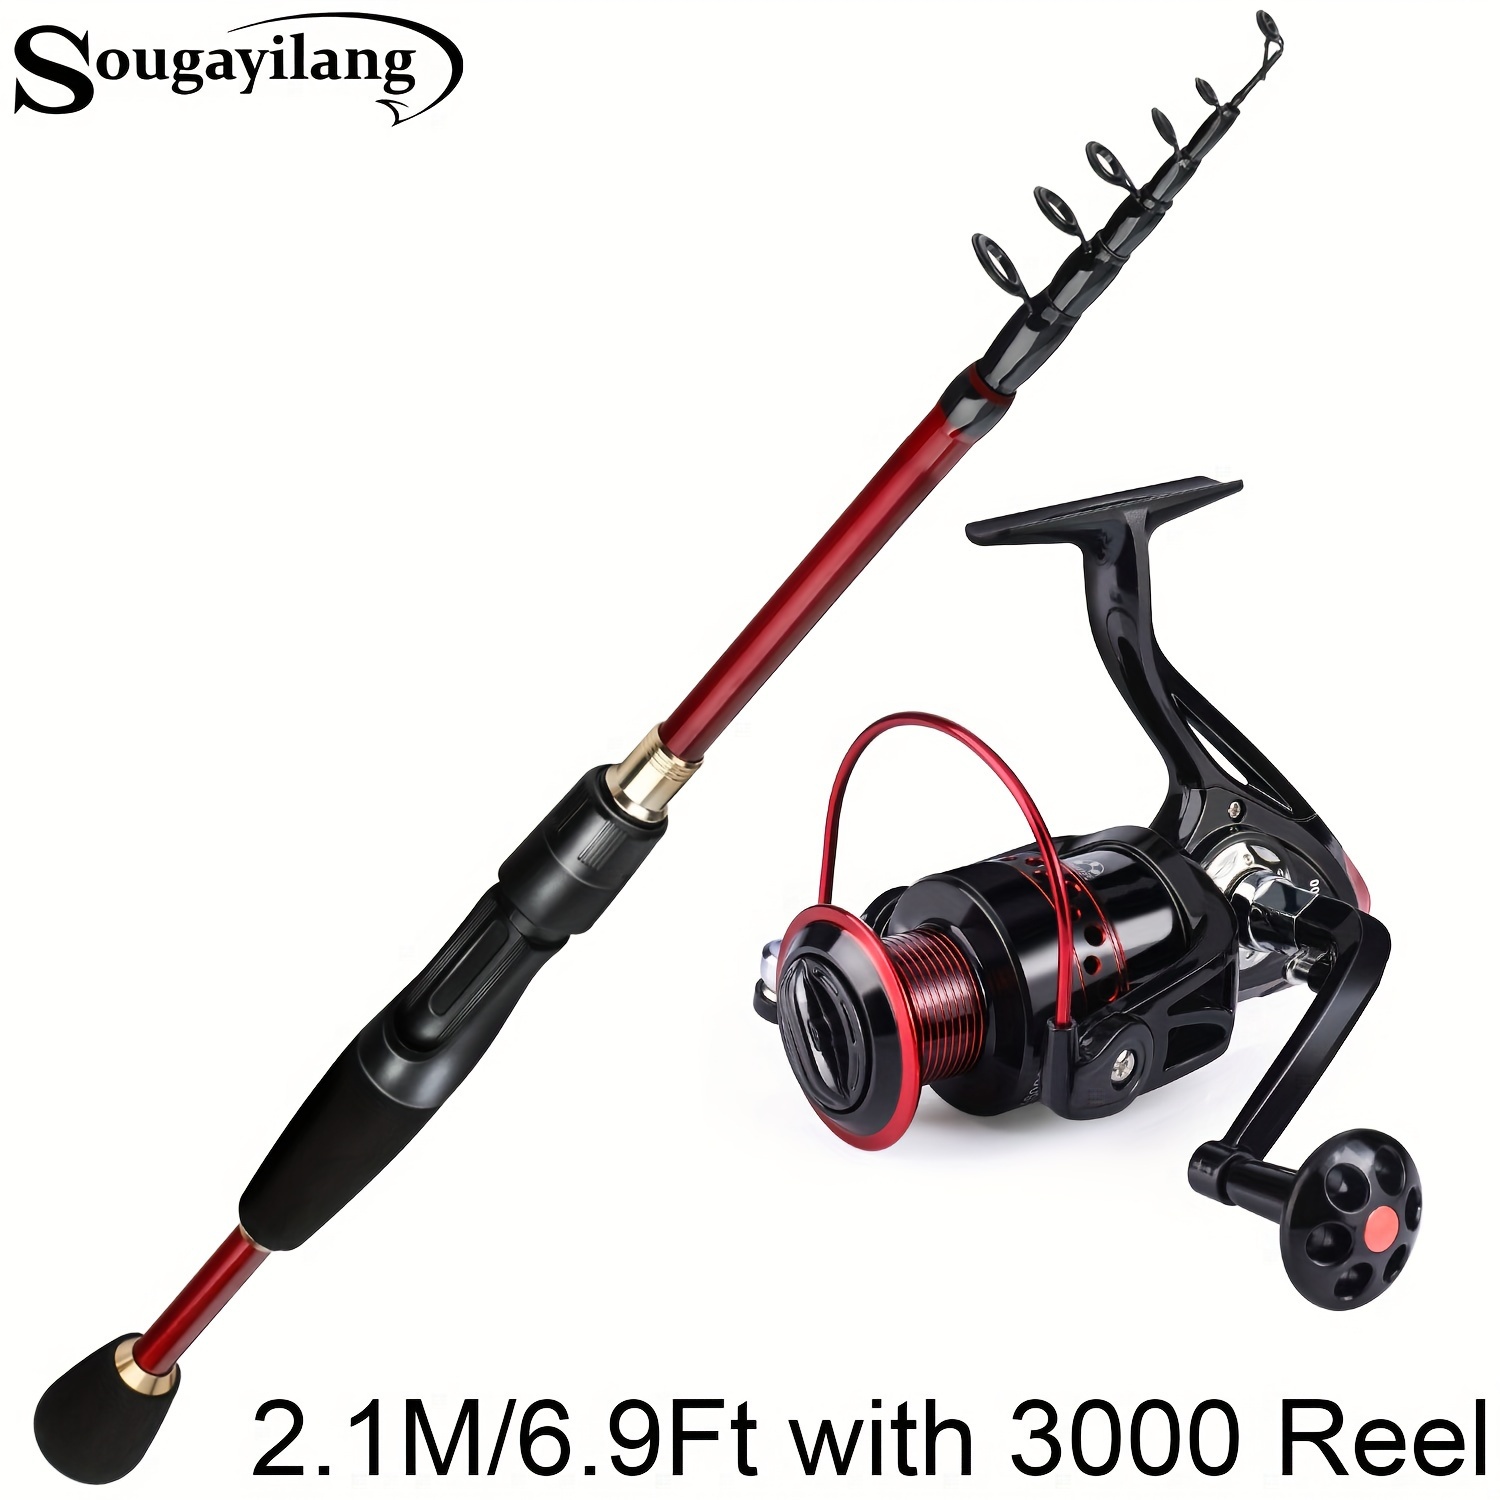 Fishing Rod and Reel Combo - 6.9ft Telescopic Spincast Rod with